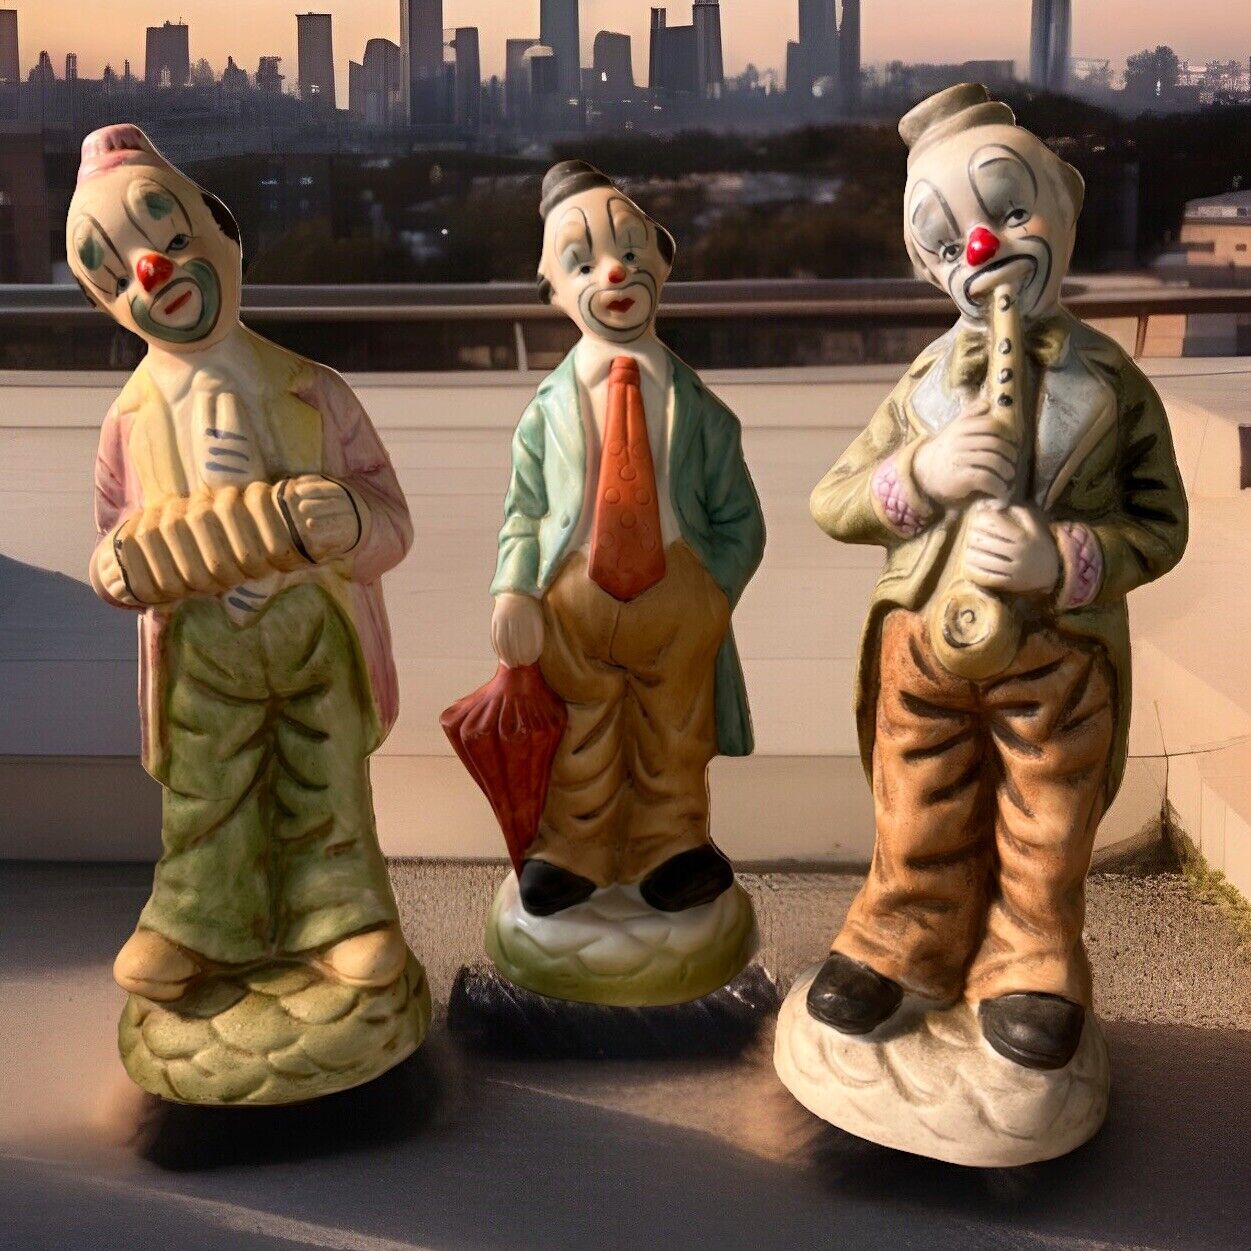 Lot If 3 Vintage Porcelain Hobo Clowns with Musical Instruments Figurines Retro